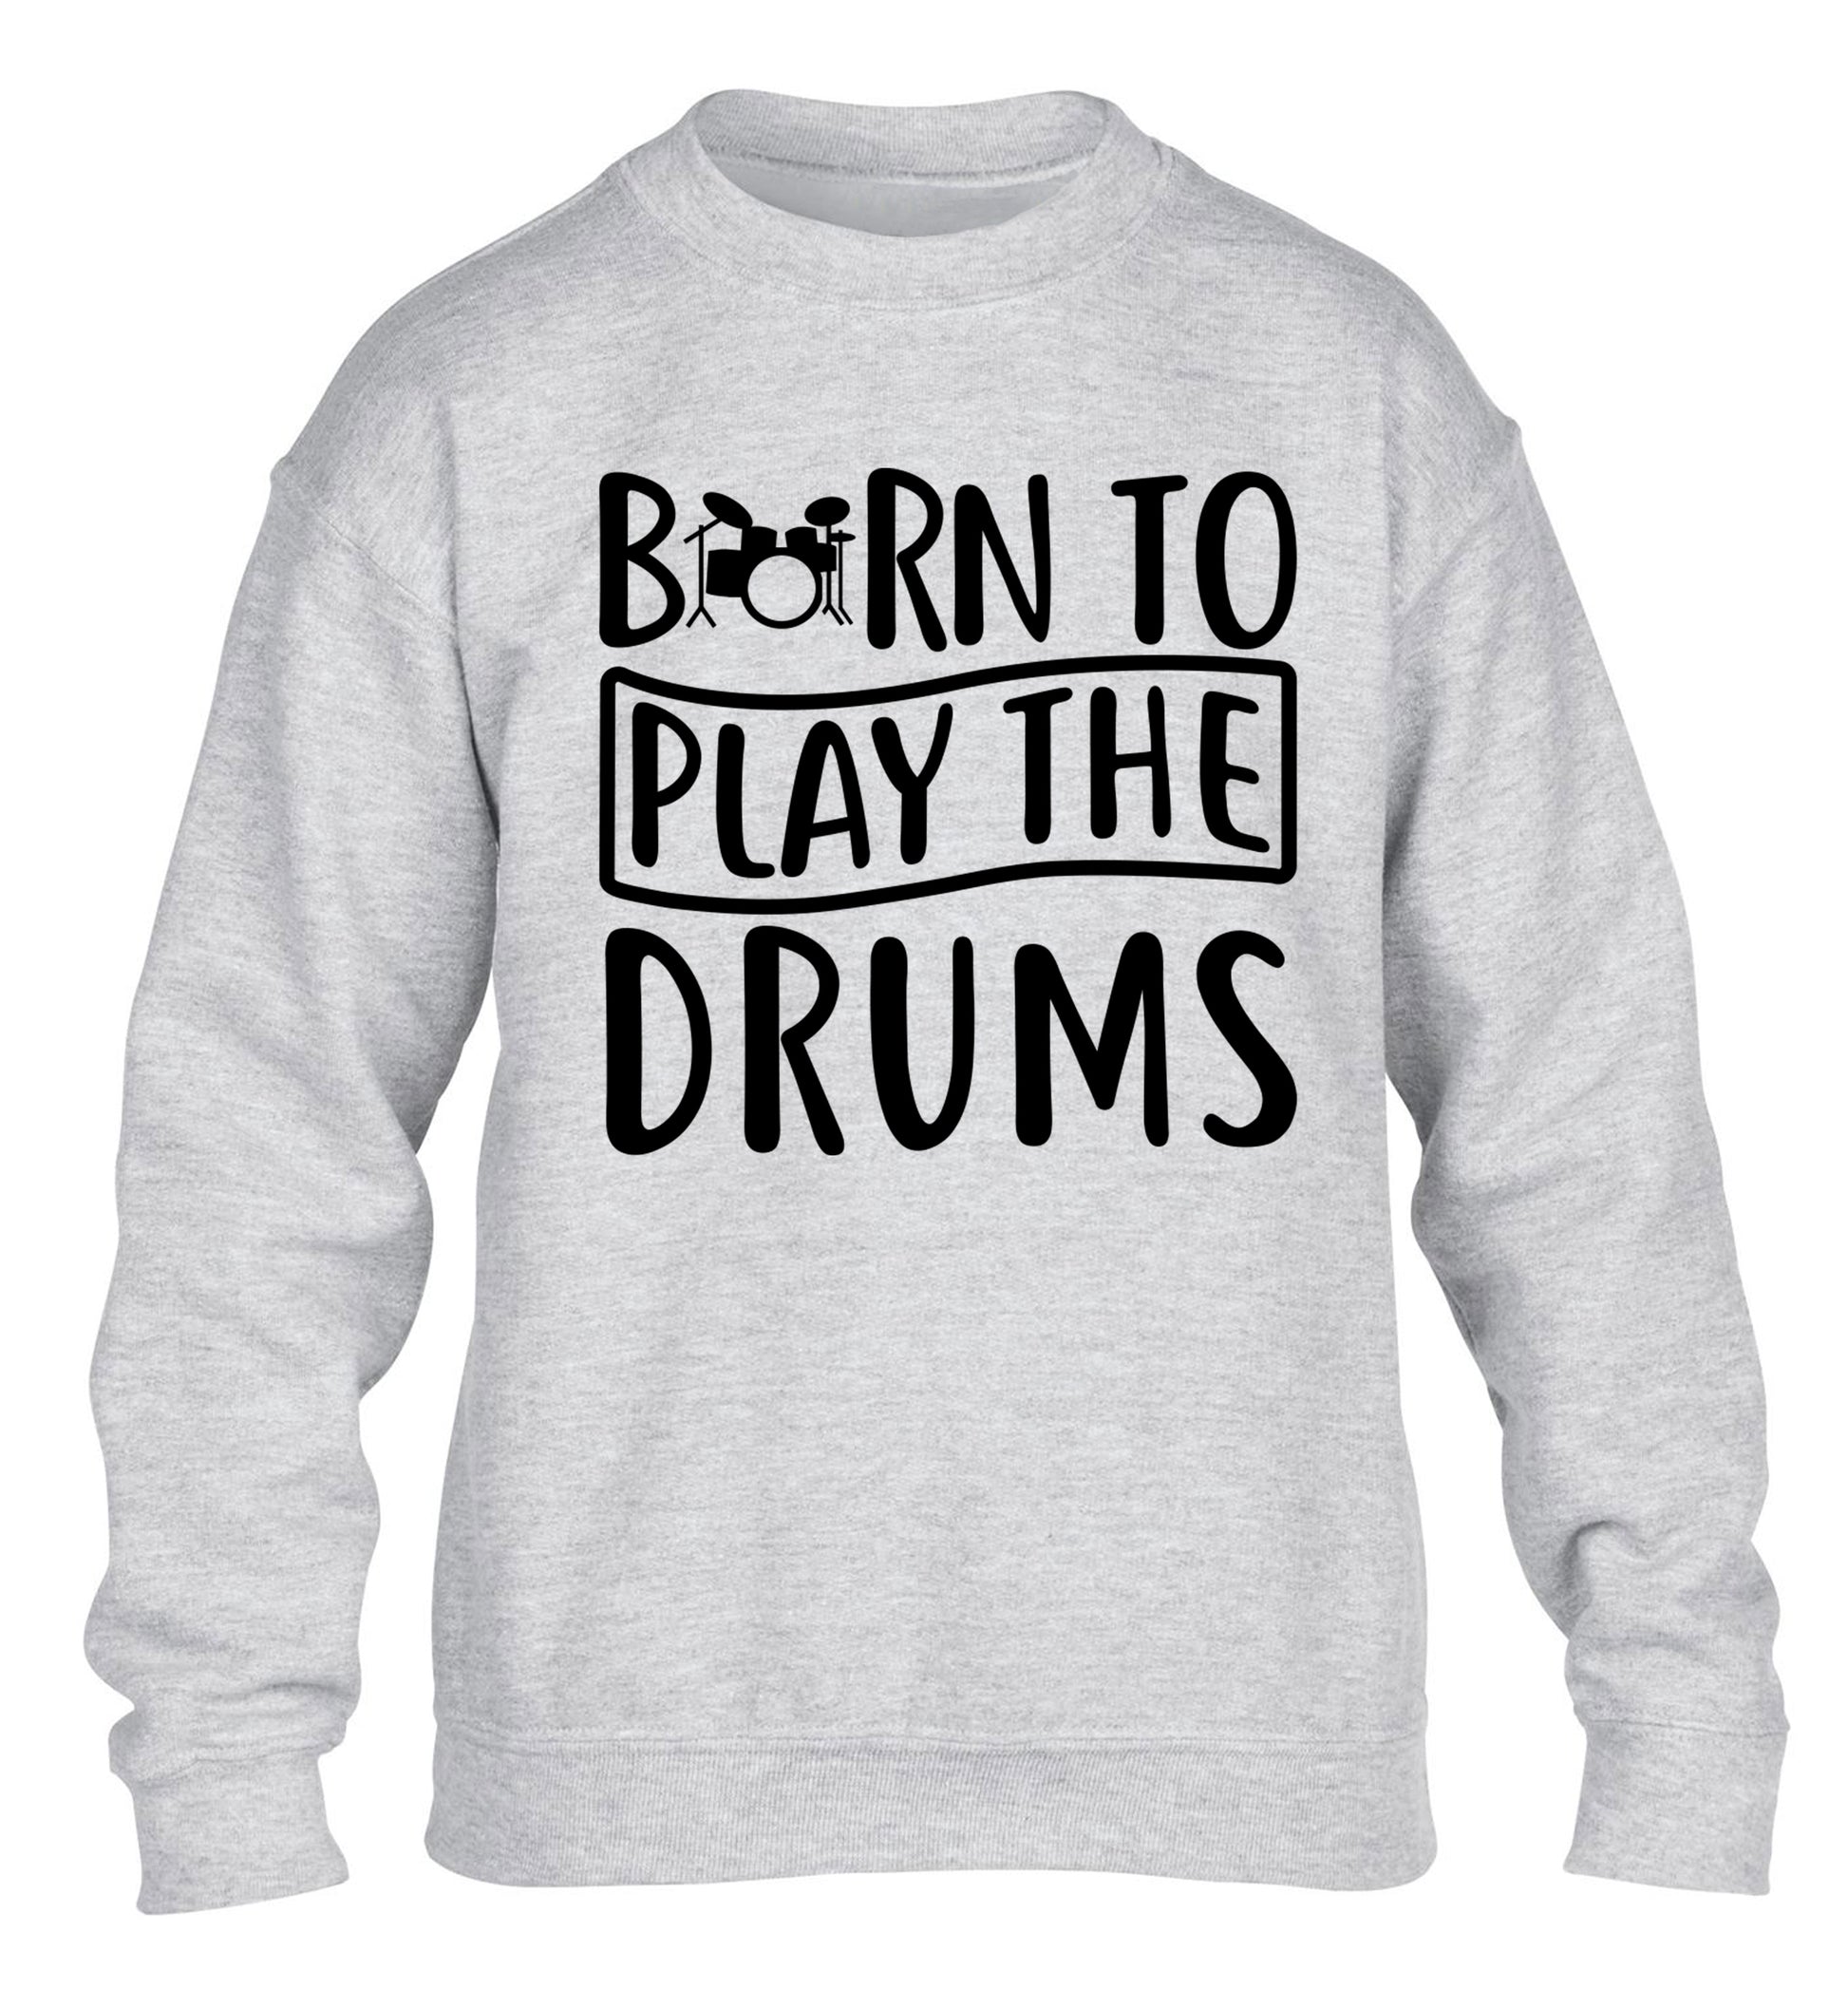 Born to play the drums children's grey sweater 12-14 Years